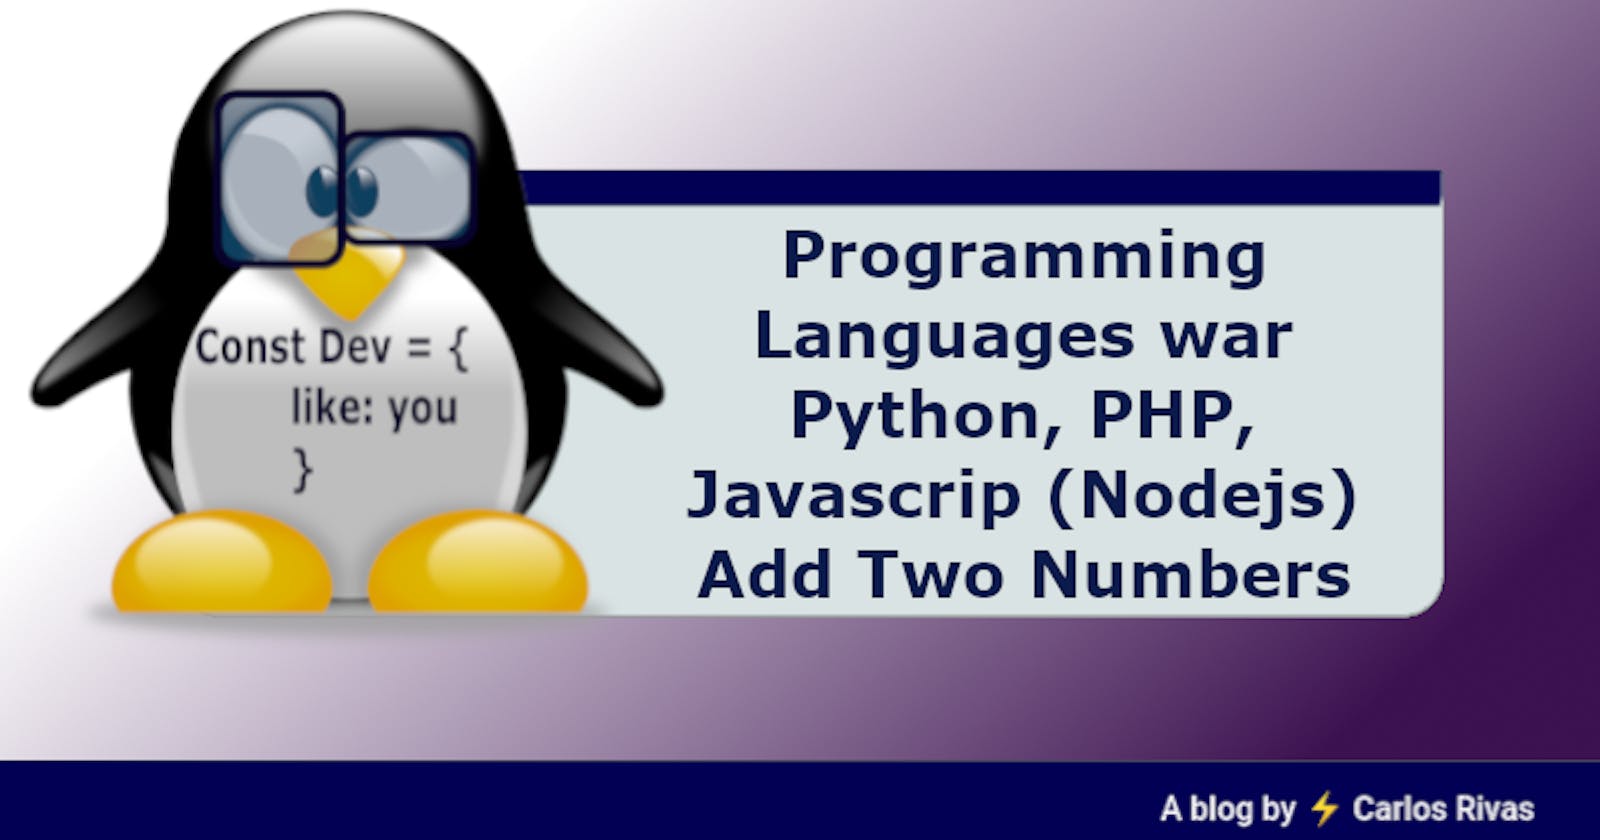 Programming Languages war
Python, PHP, Javascrip (Nodejs)
Add Two Numbers